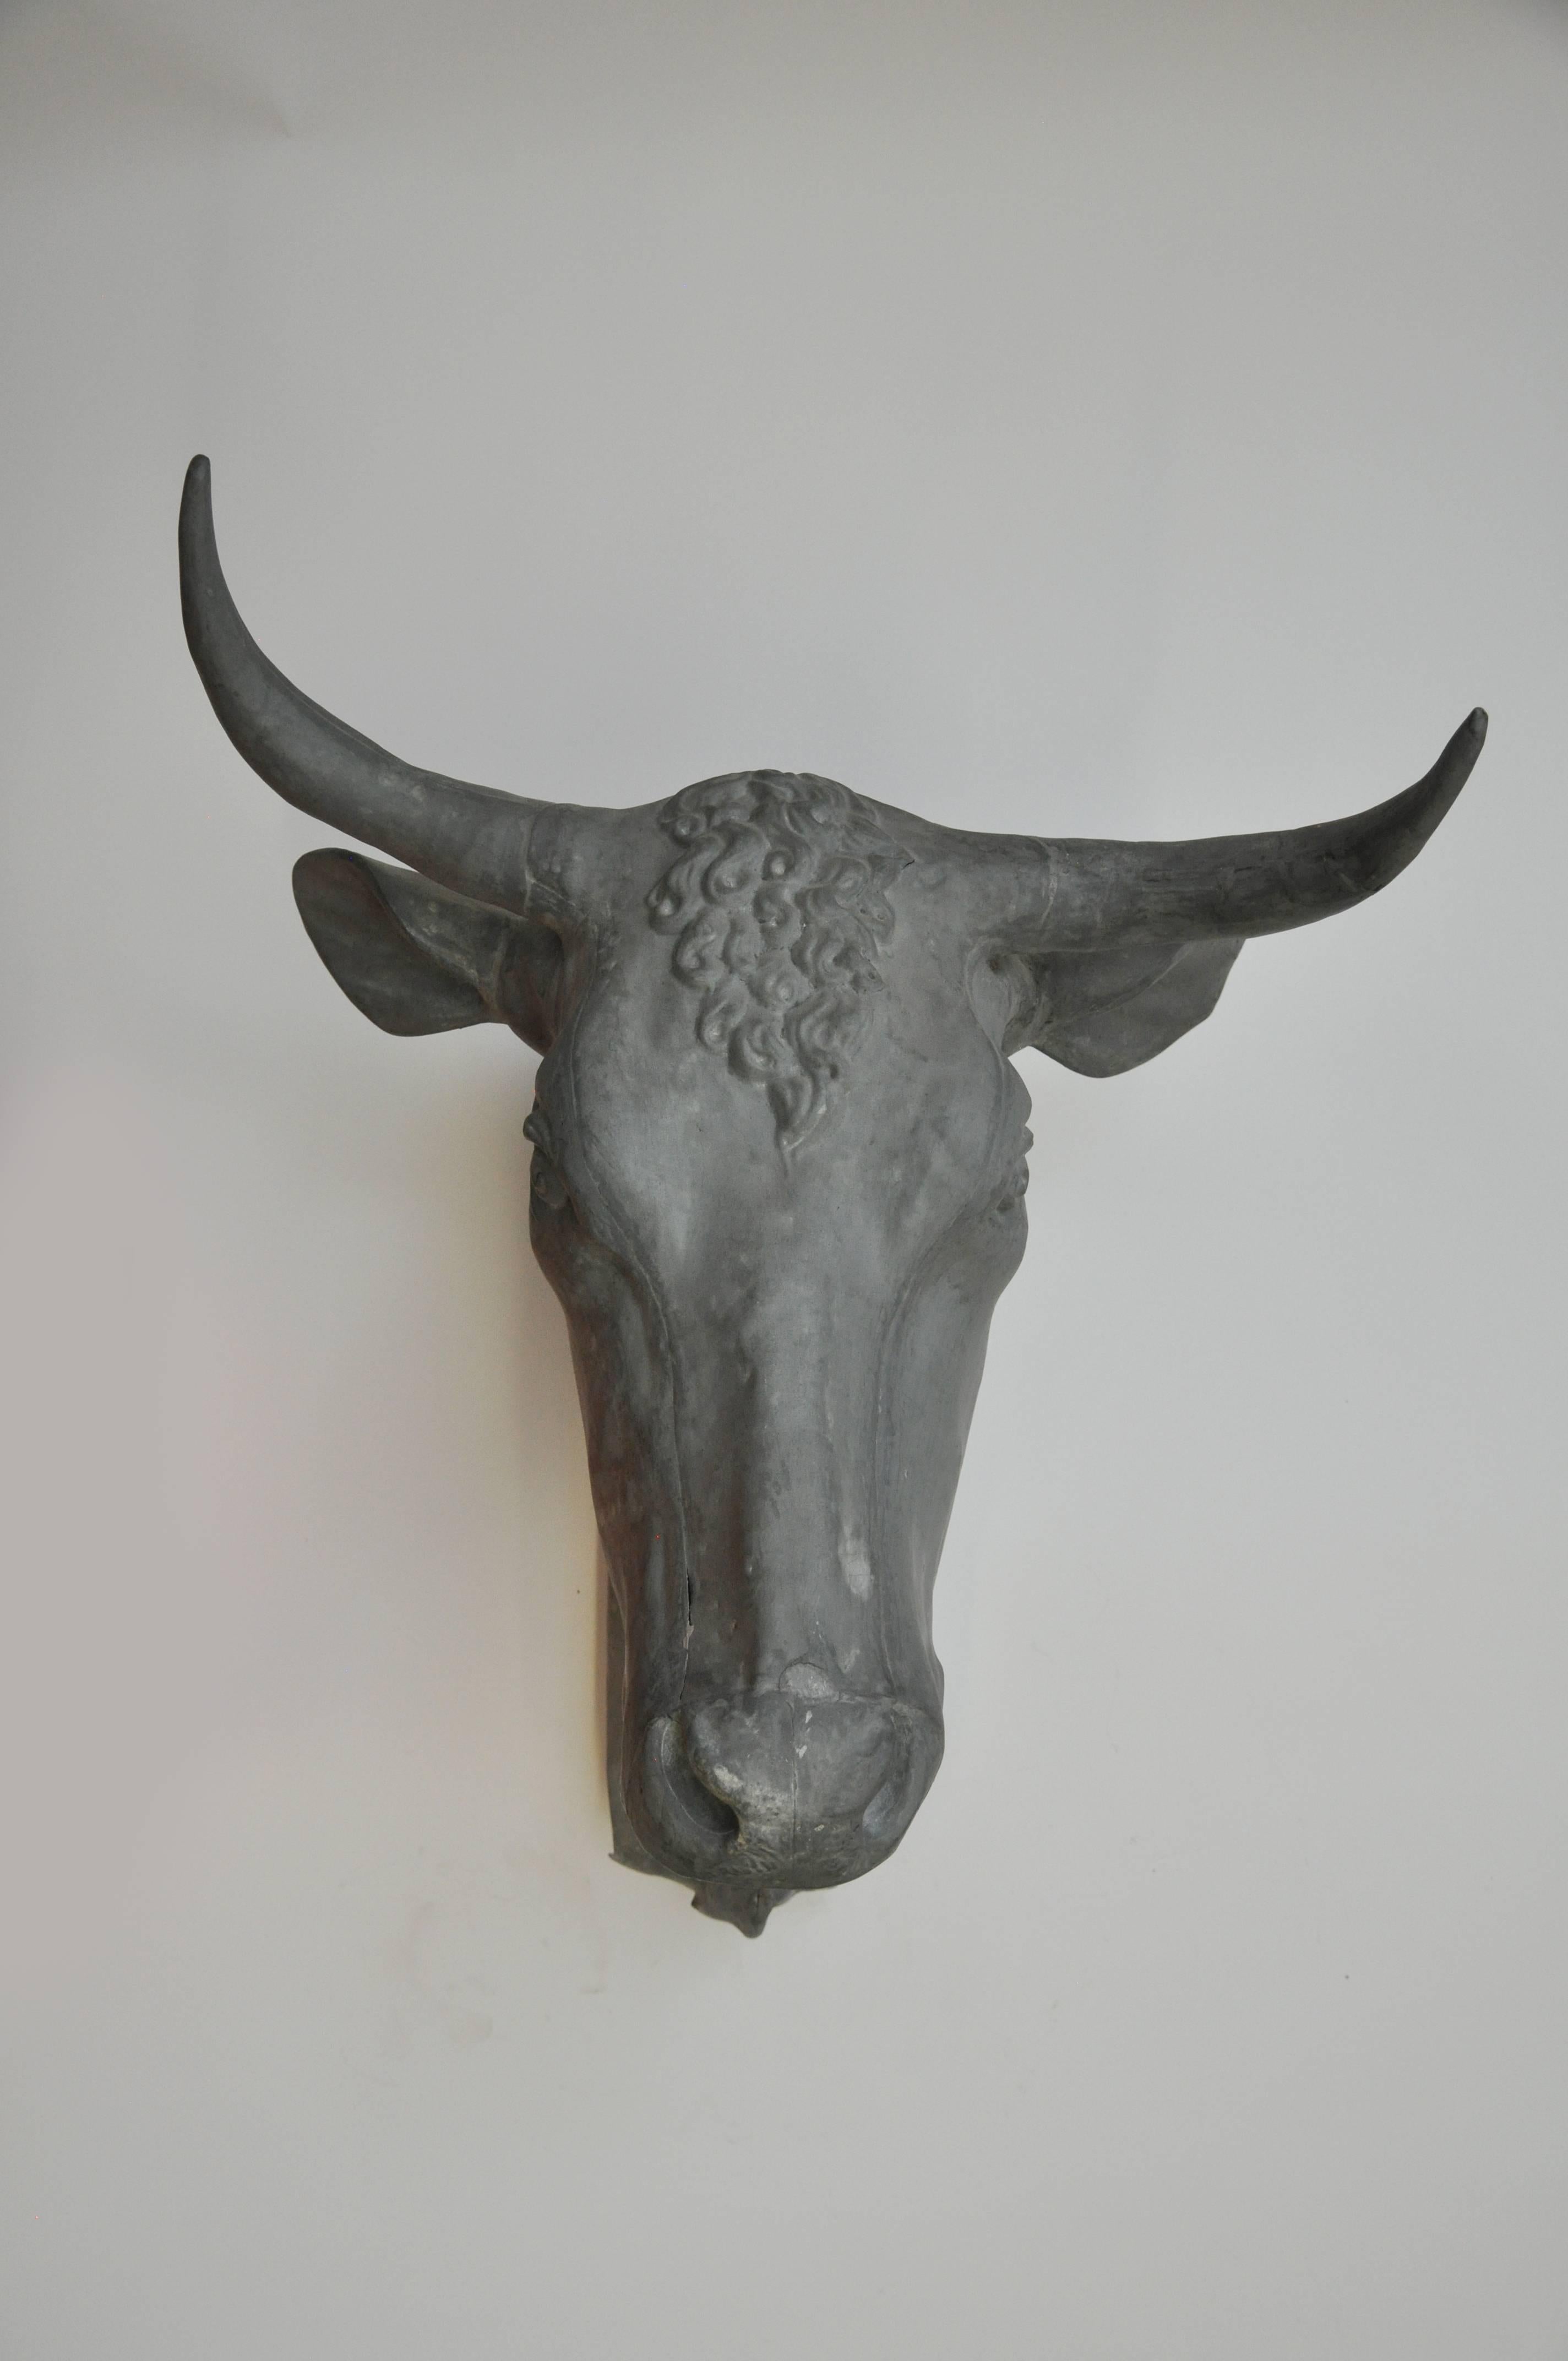 An exceptional French 19th century zinc bull's head with fine detailing,
circa 1850.